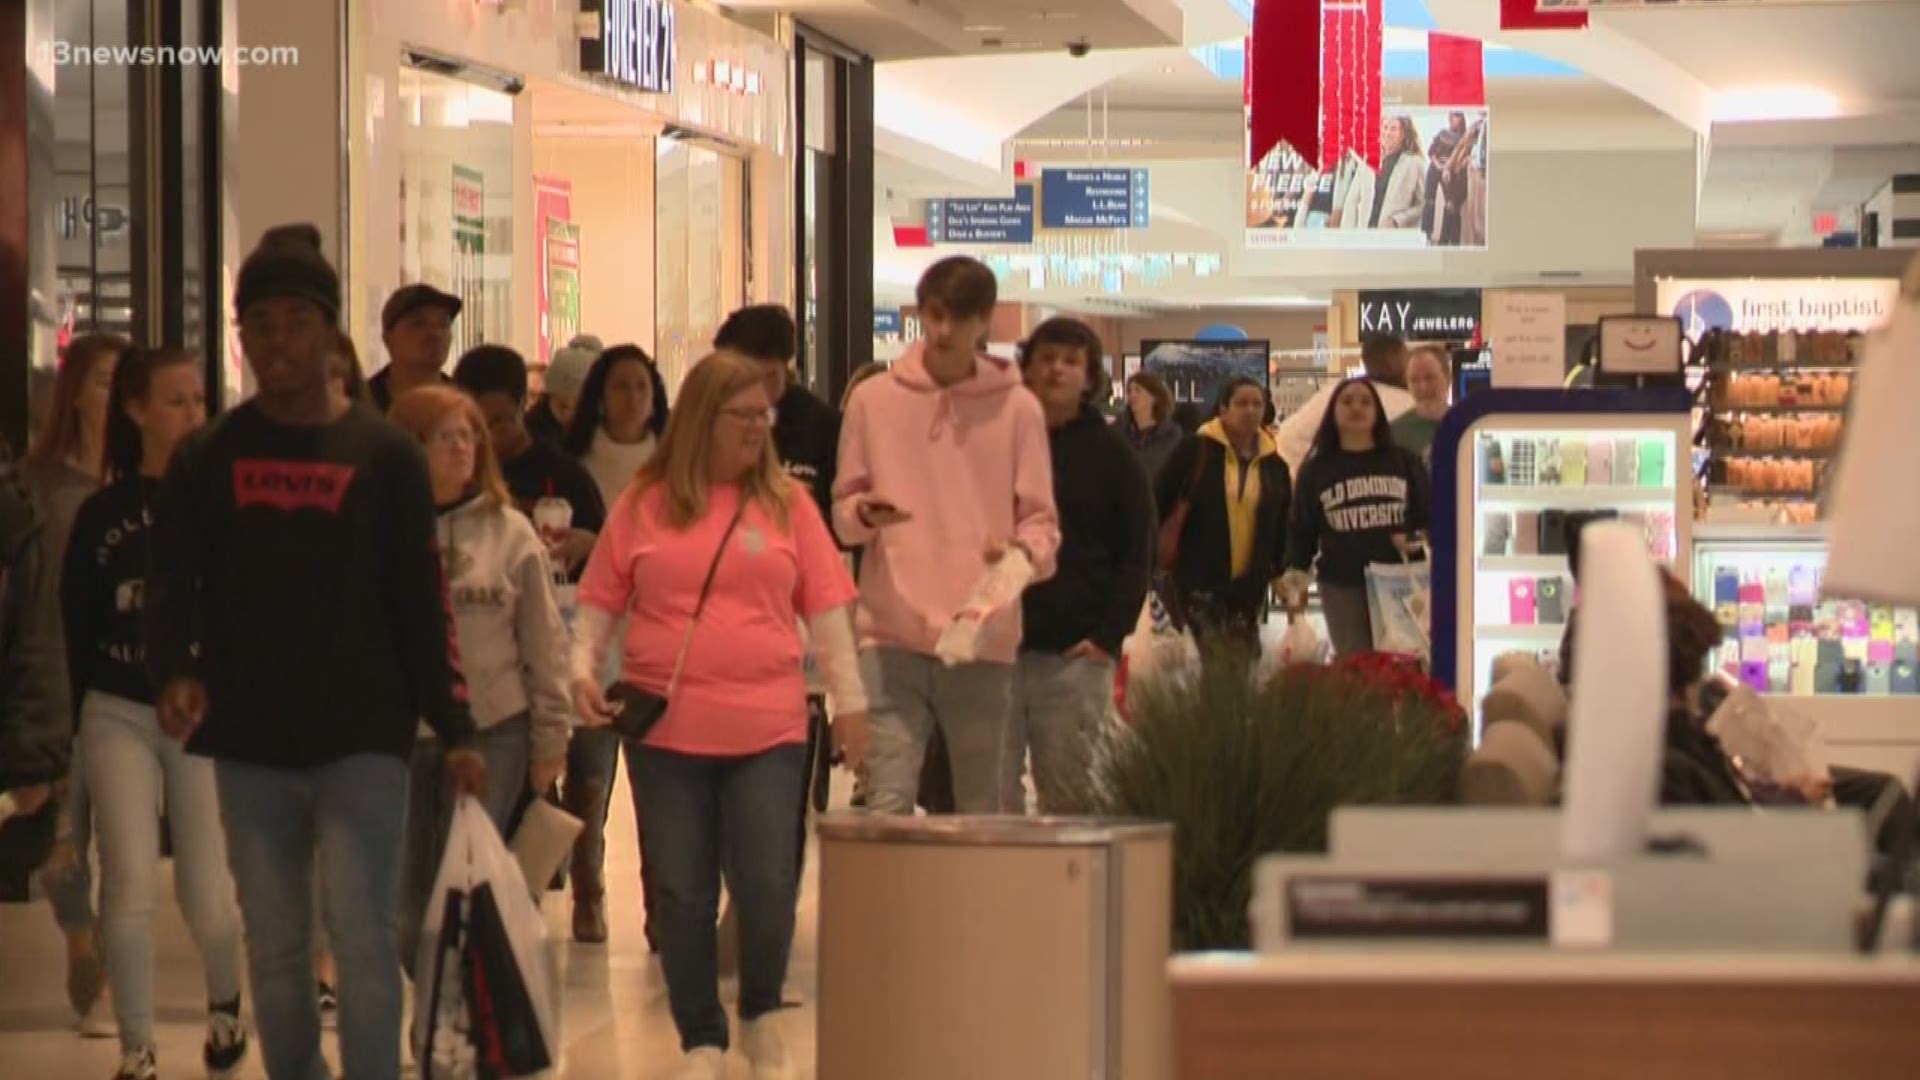 13News Now Megan Shinn has the lowdown on where you can go on Christmas Eve to do some last-minute Christmas shopping around the area.